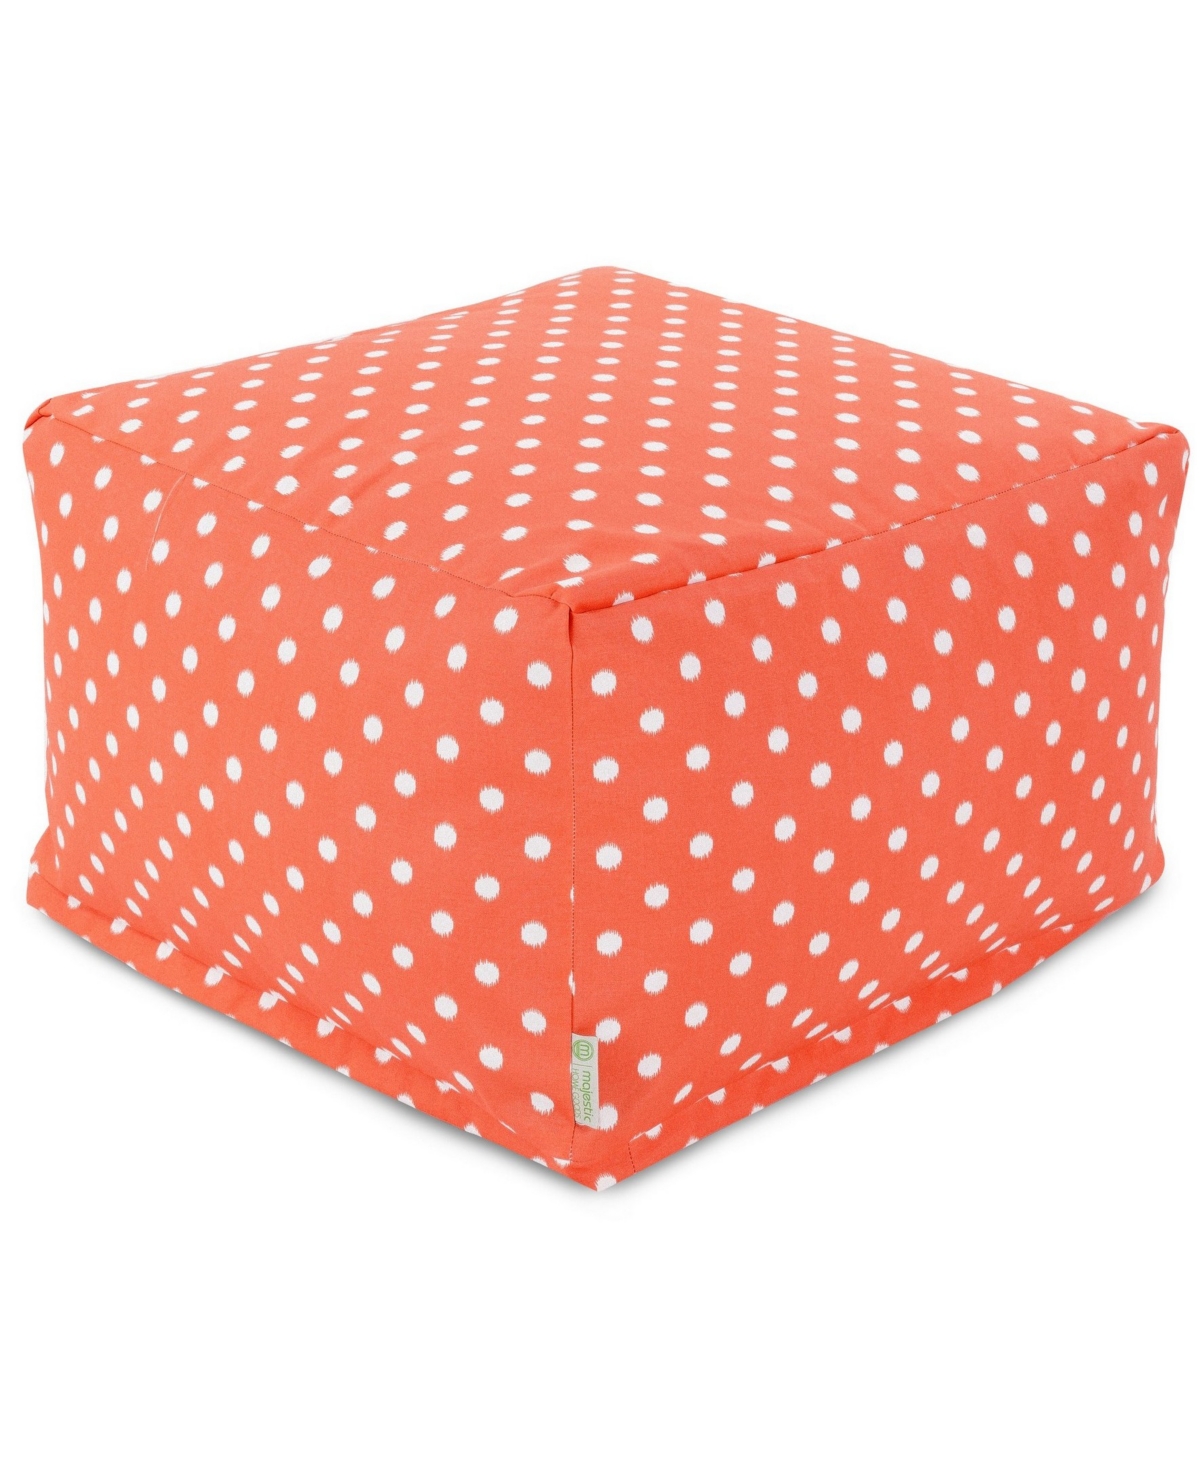 UPC 859072202726 product image for Majestic Home Goods Ikat Dot Ottoman Square Pouf 27